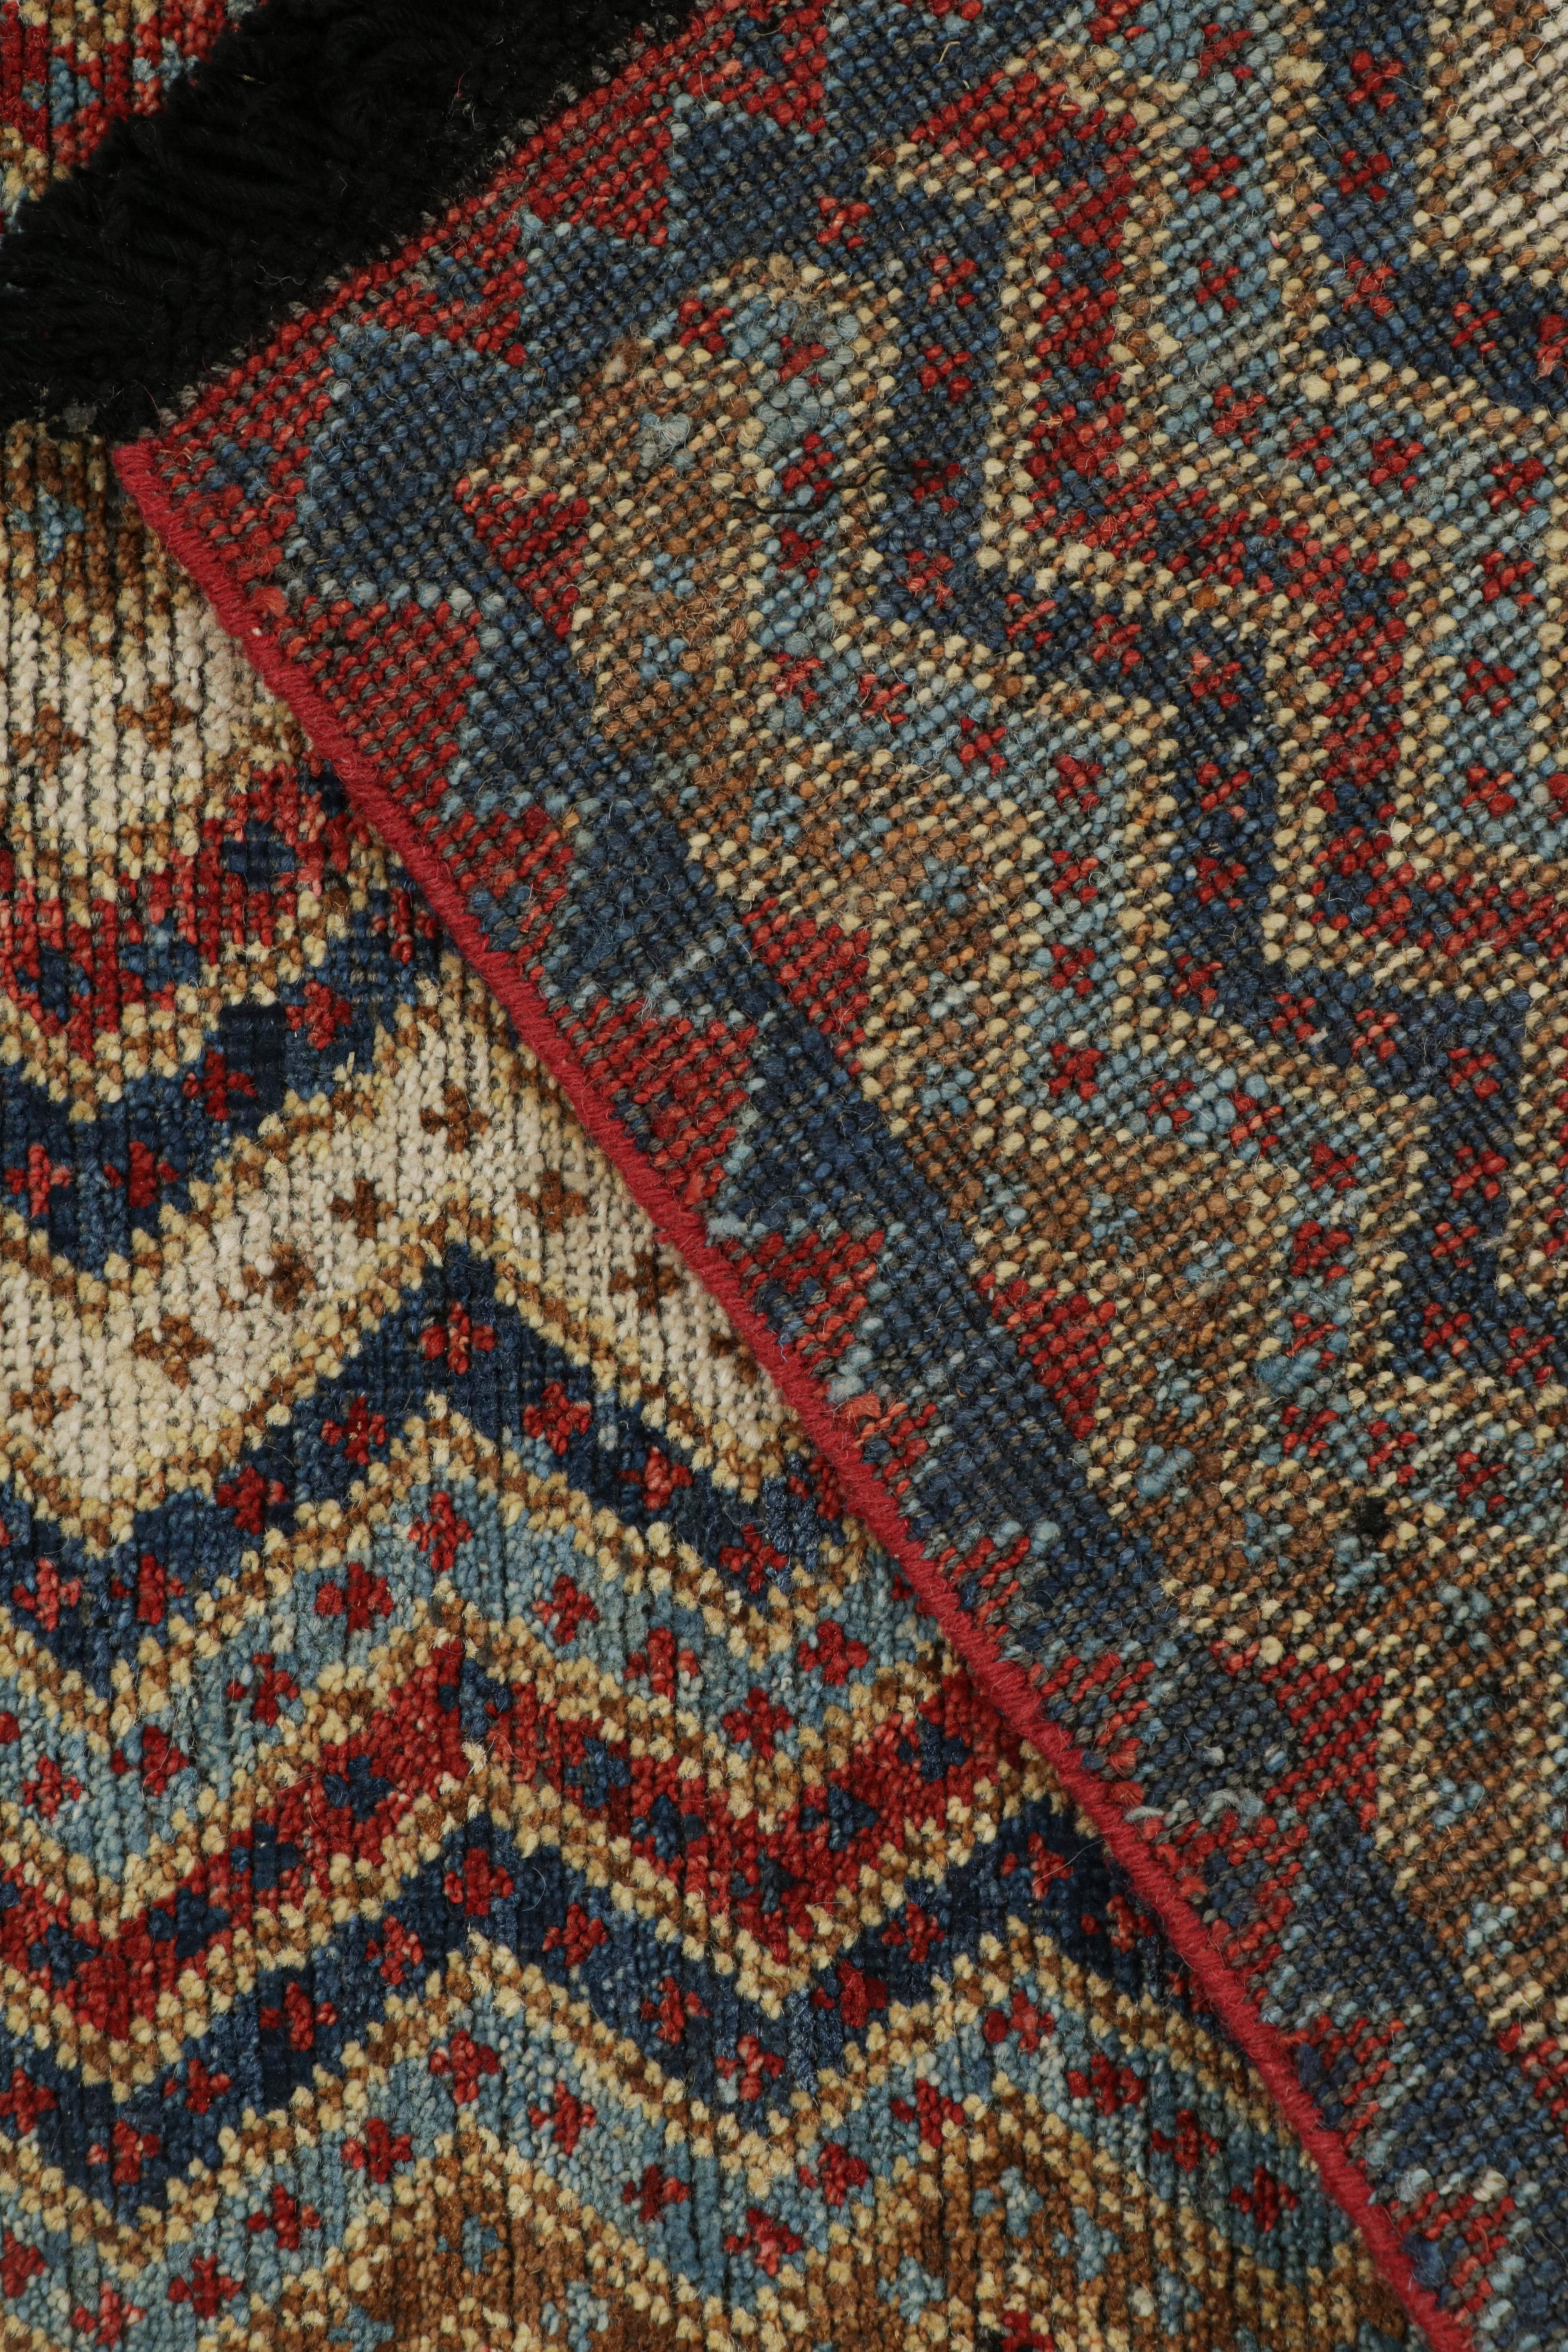 Wool Rug & Kilim’s Antique Tribal Style rug in Red, Blue, Brown & White Patterns For Sale